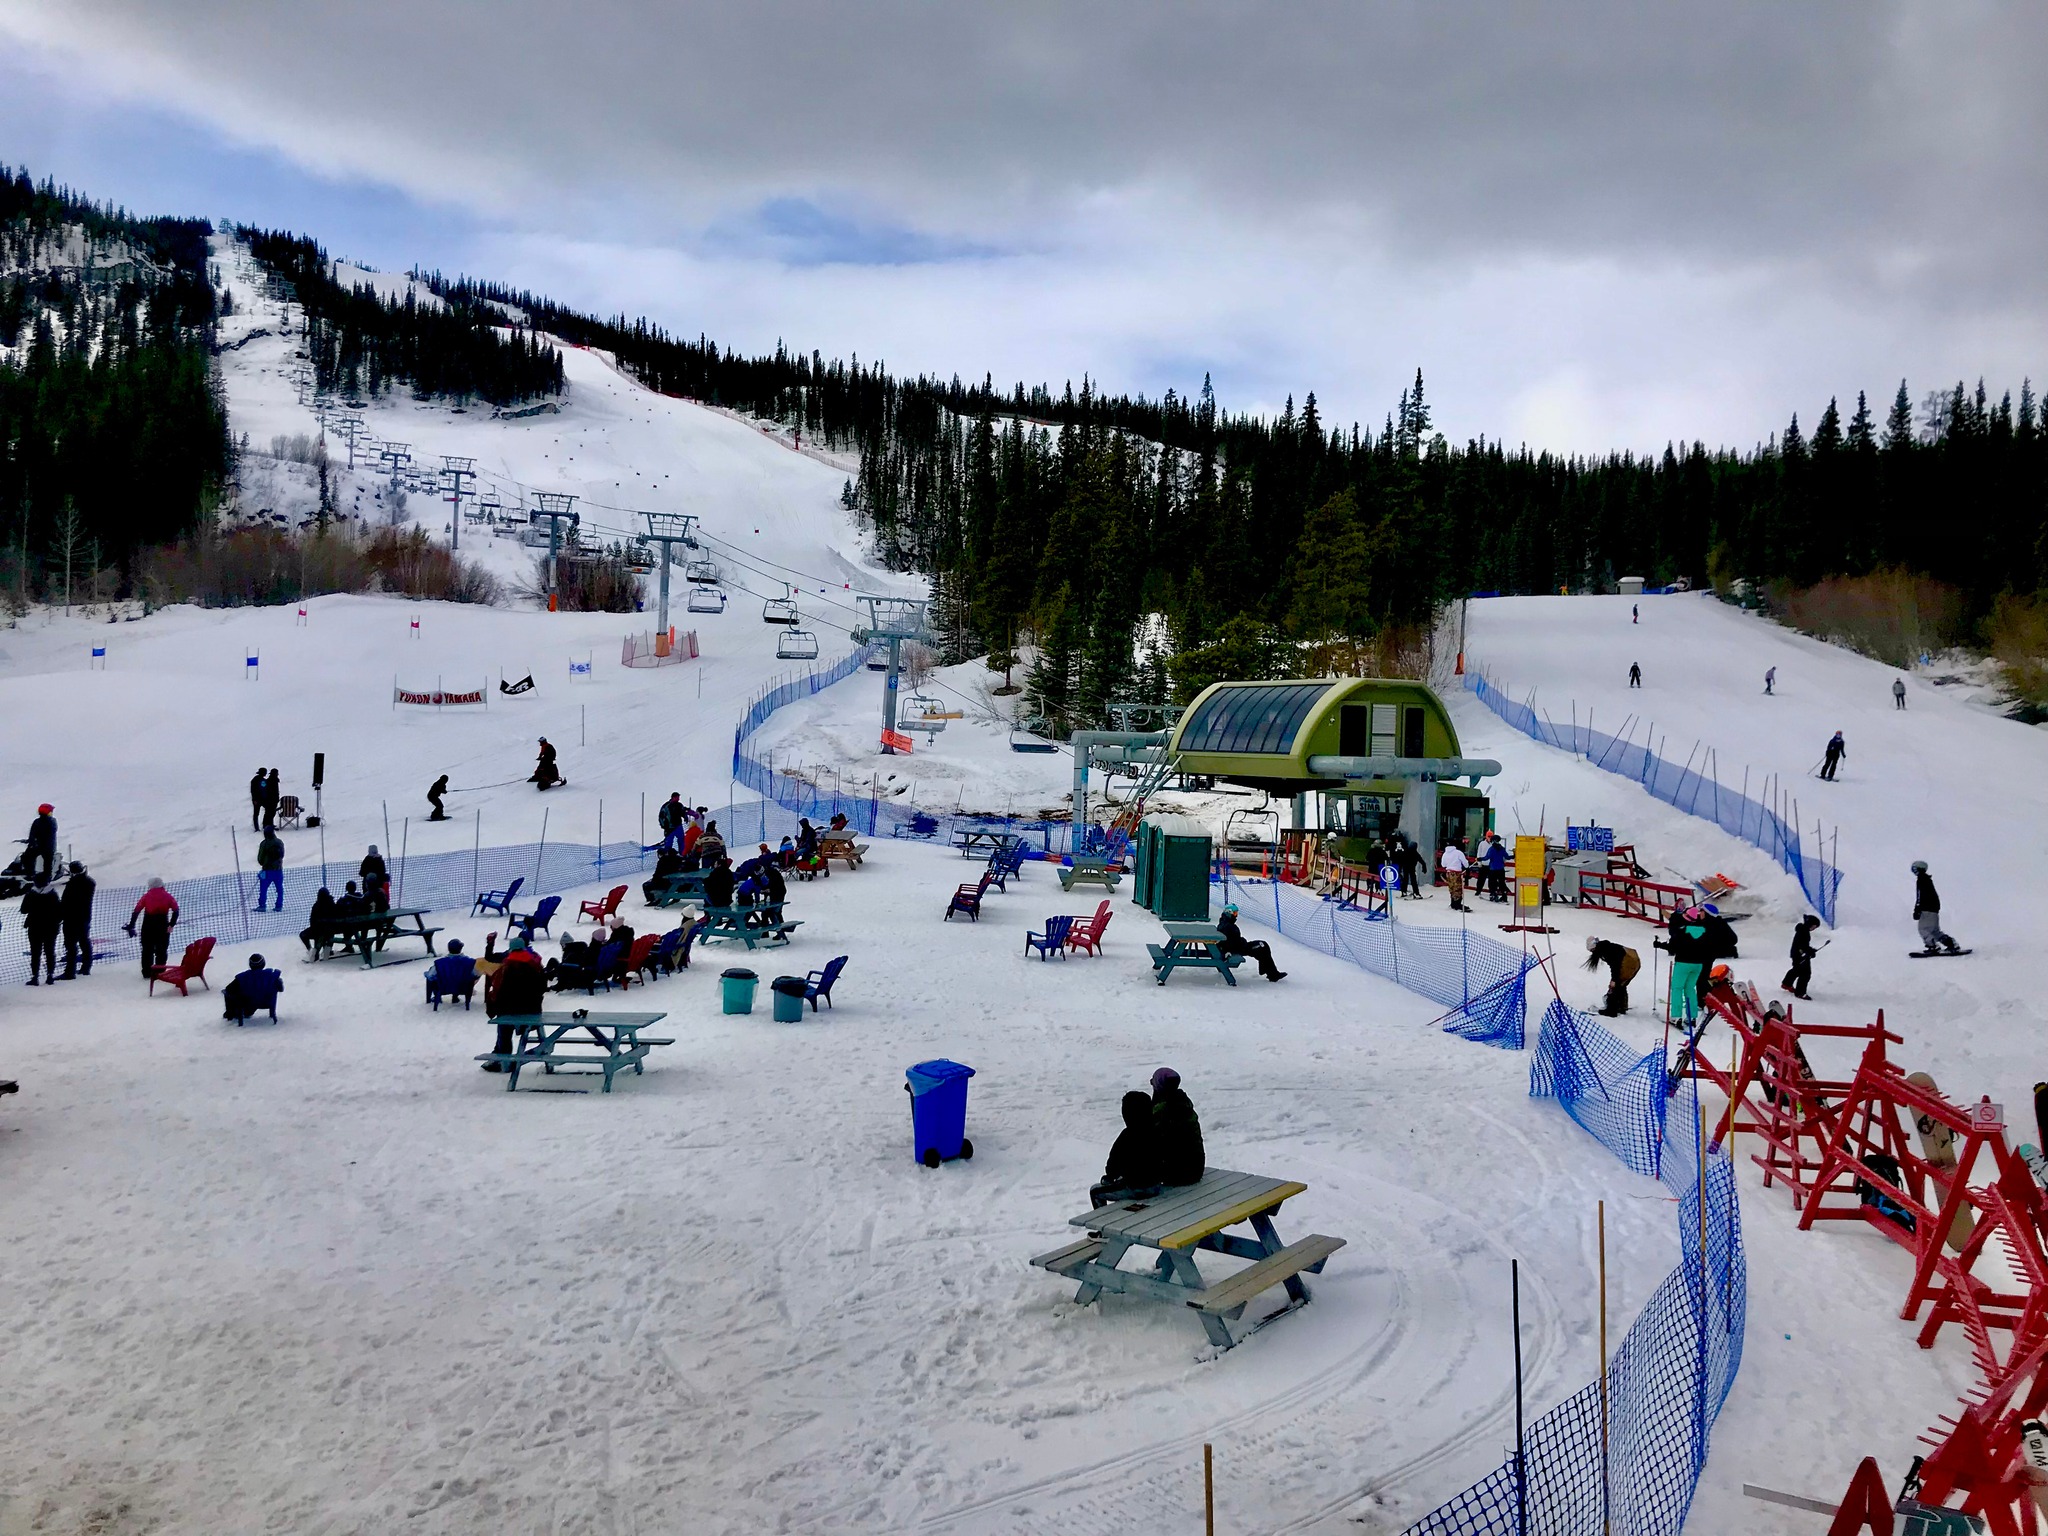 The Largest Ski Resort In The Yukon Territory Is Now Open For The Season!